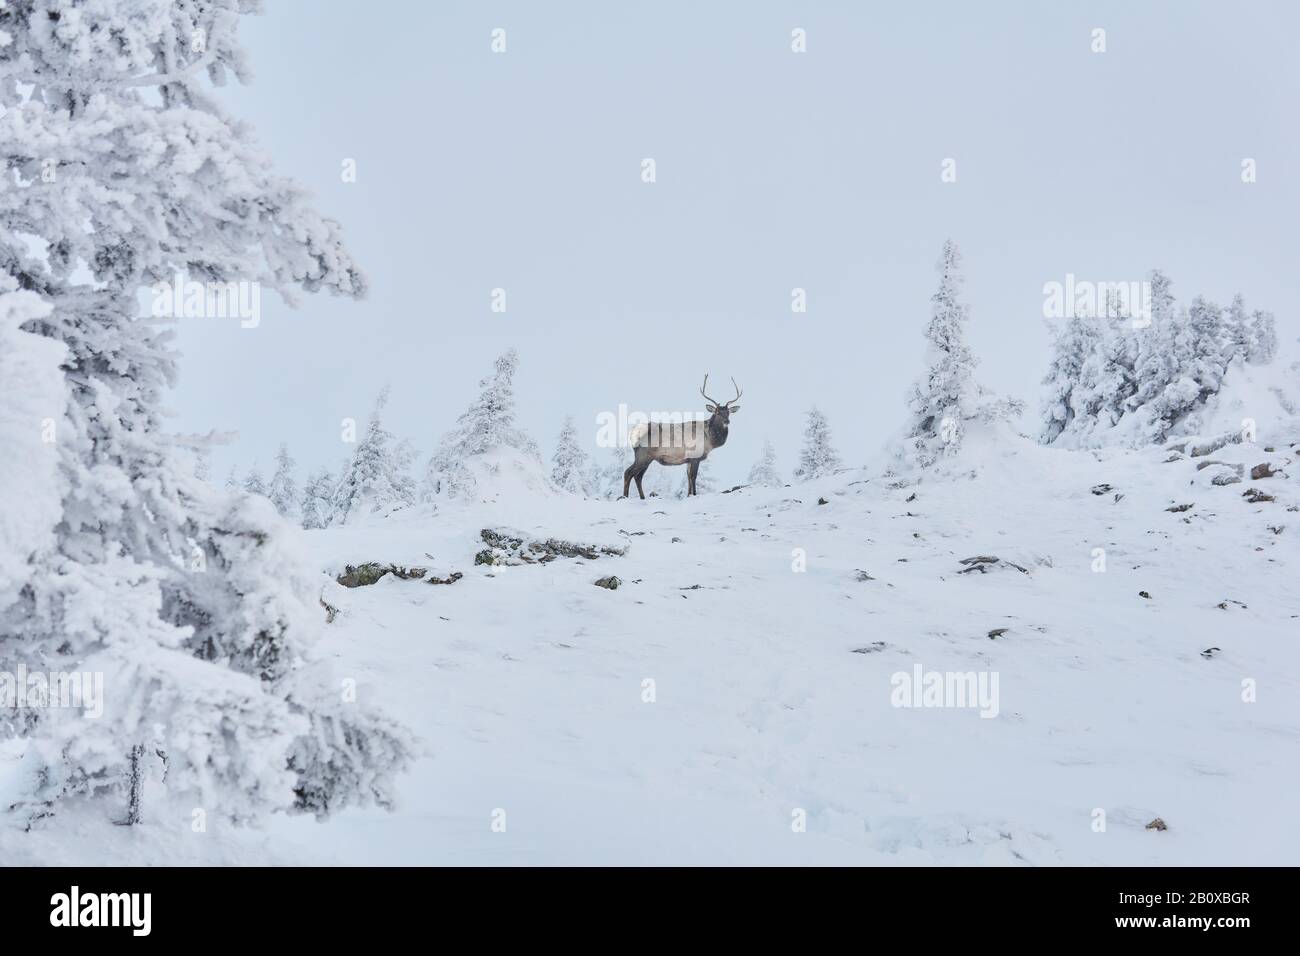 deer in winter snowy mountain forest Stock Photo